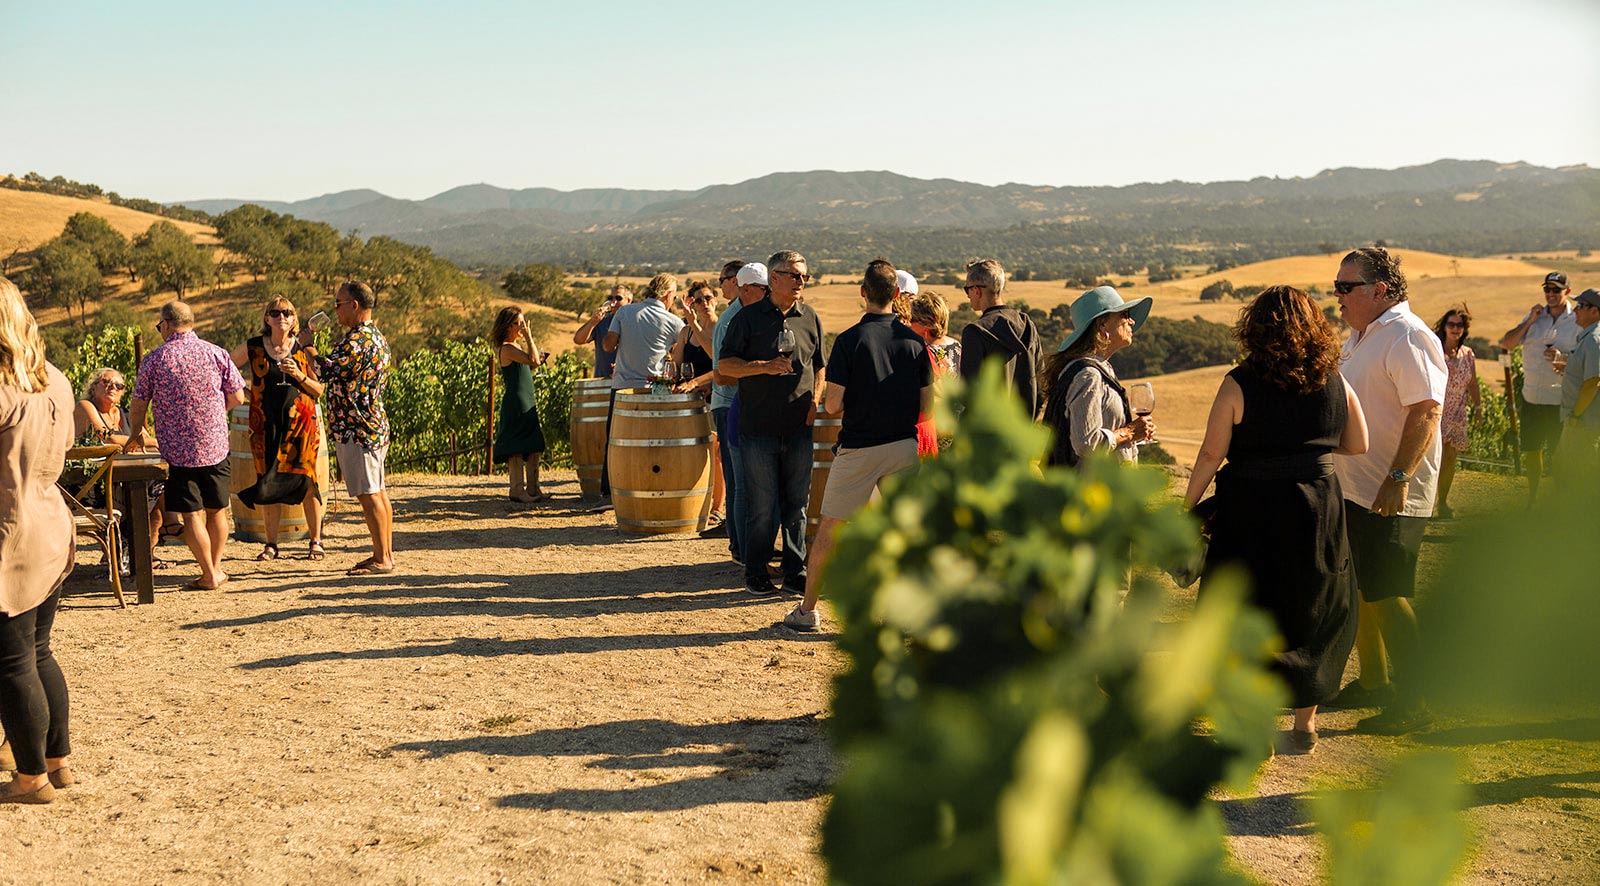 People hanging out at an outdoor wine event